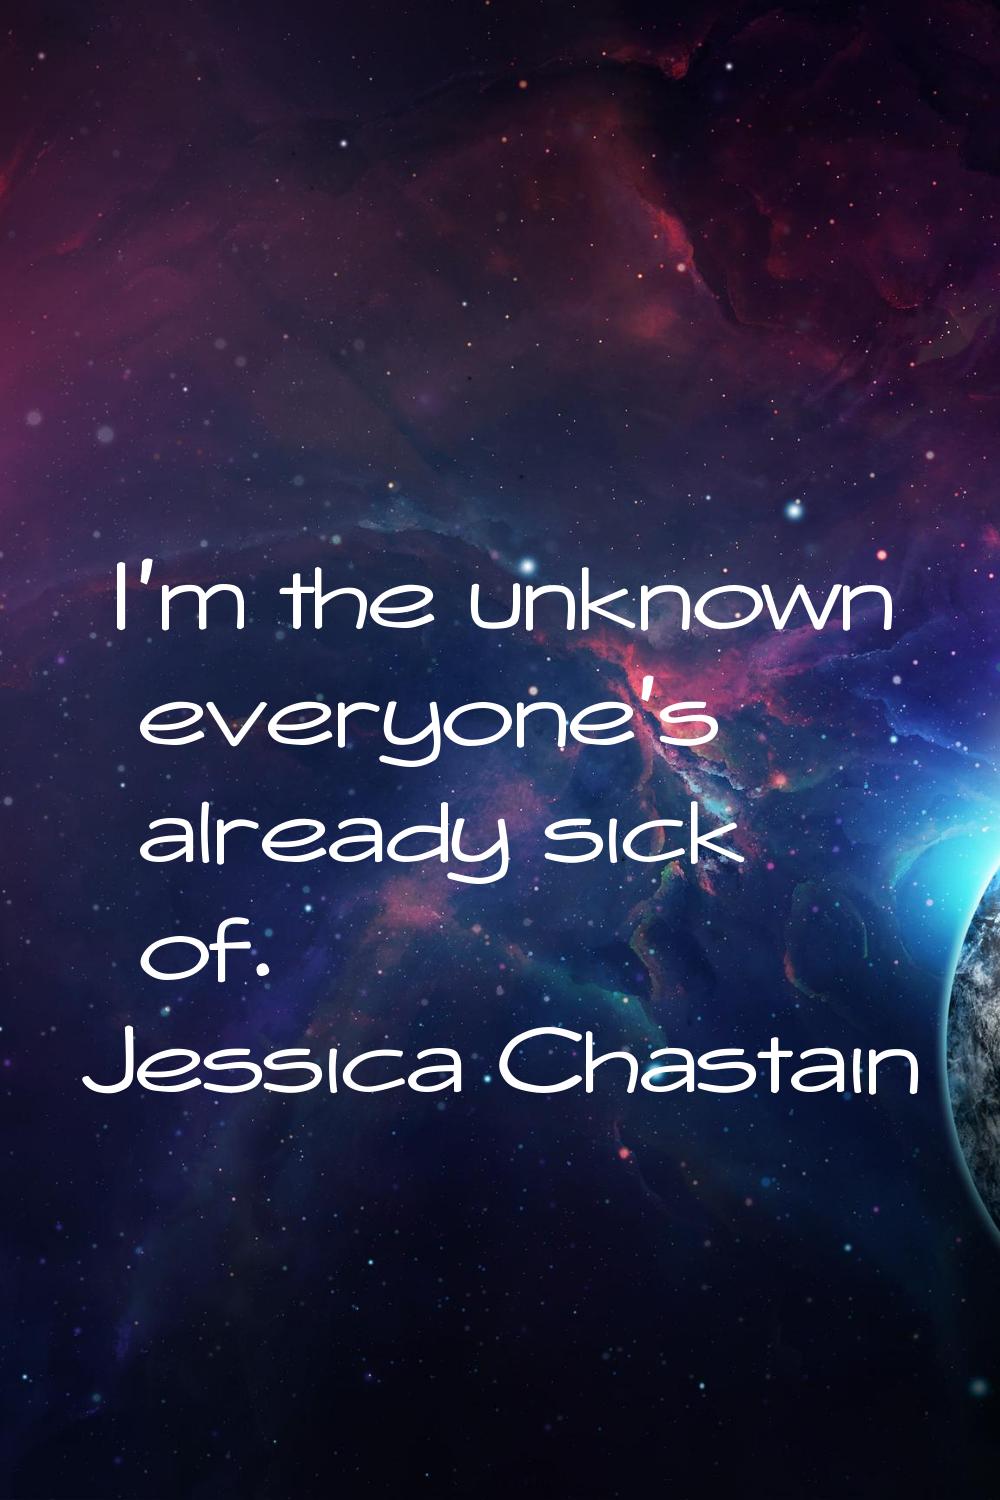 I'm the unknown everyone's already sick of.